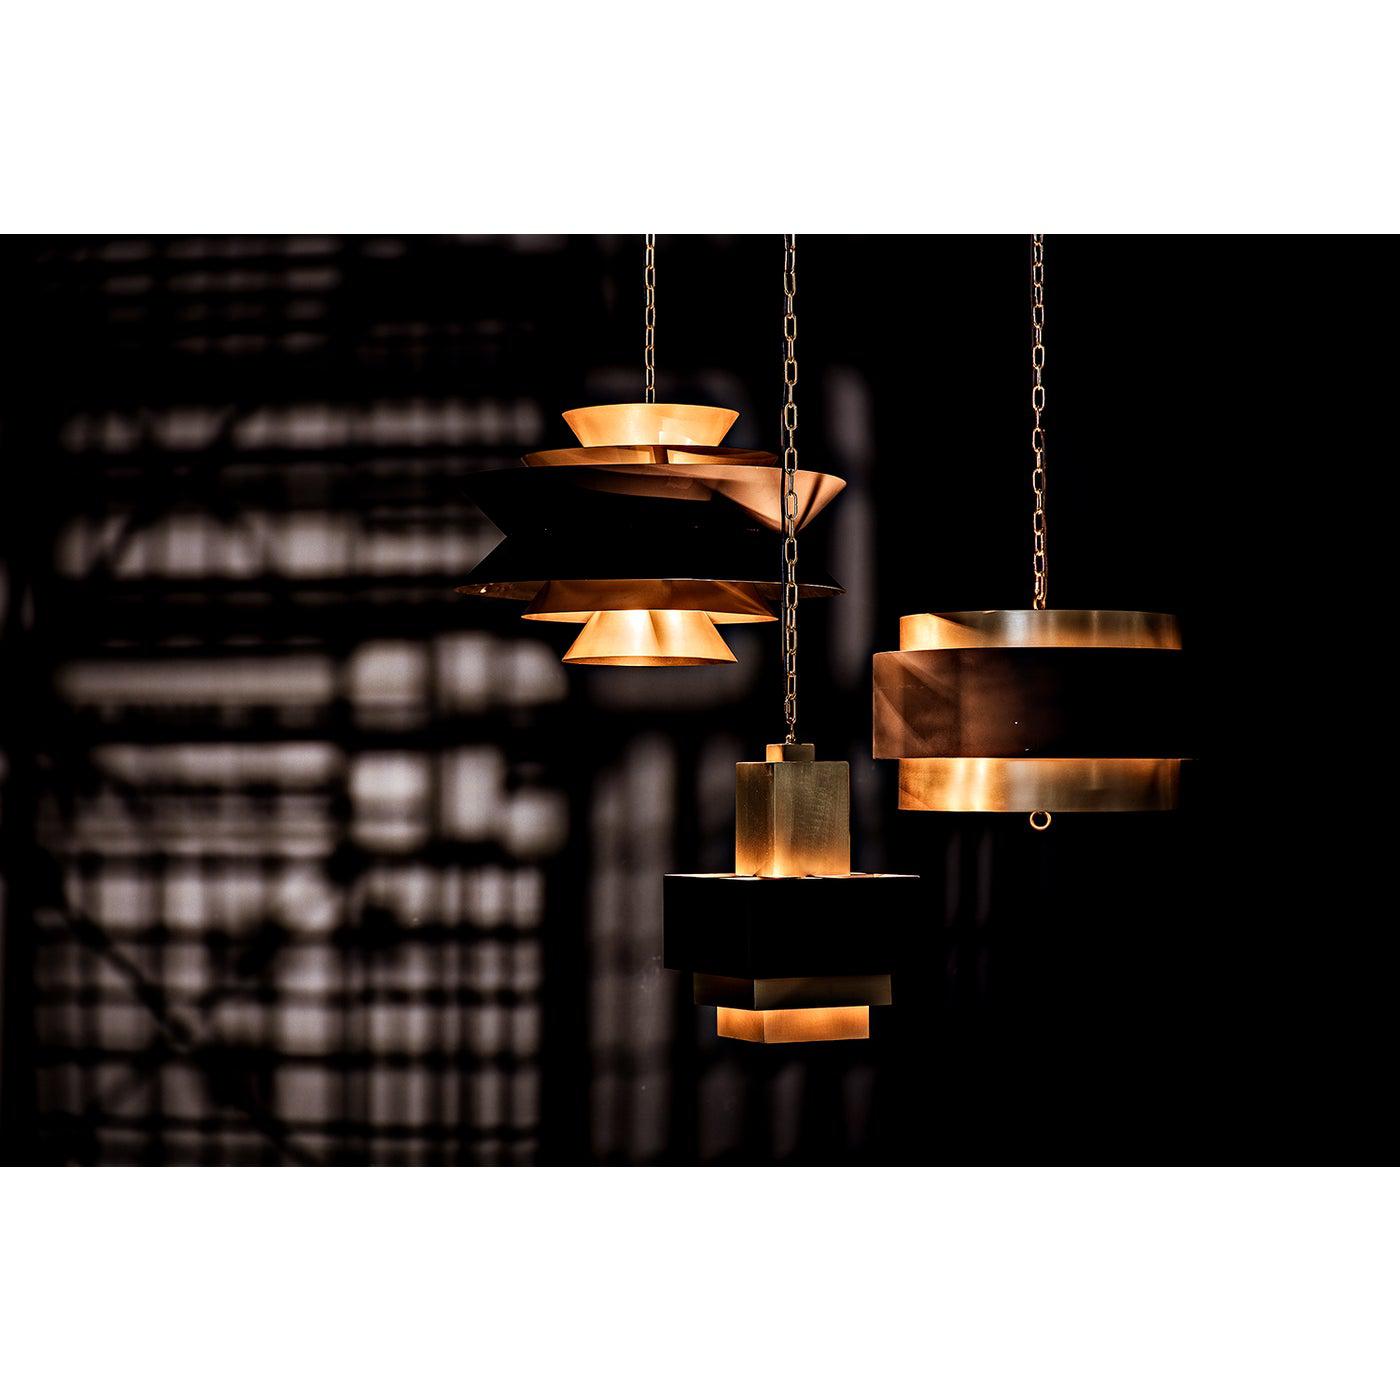 Arion Pendant, Steel with Brass Finish